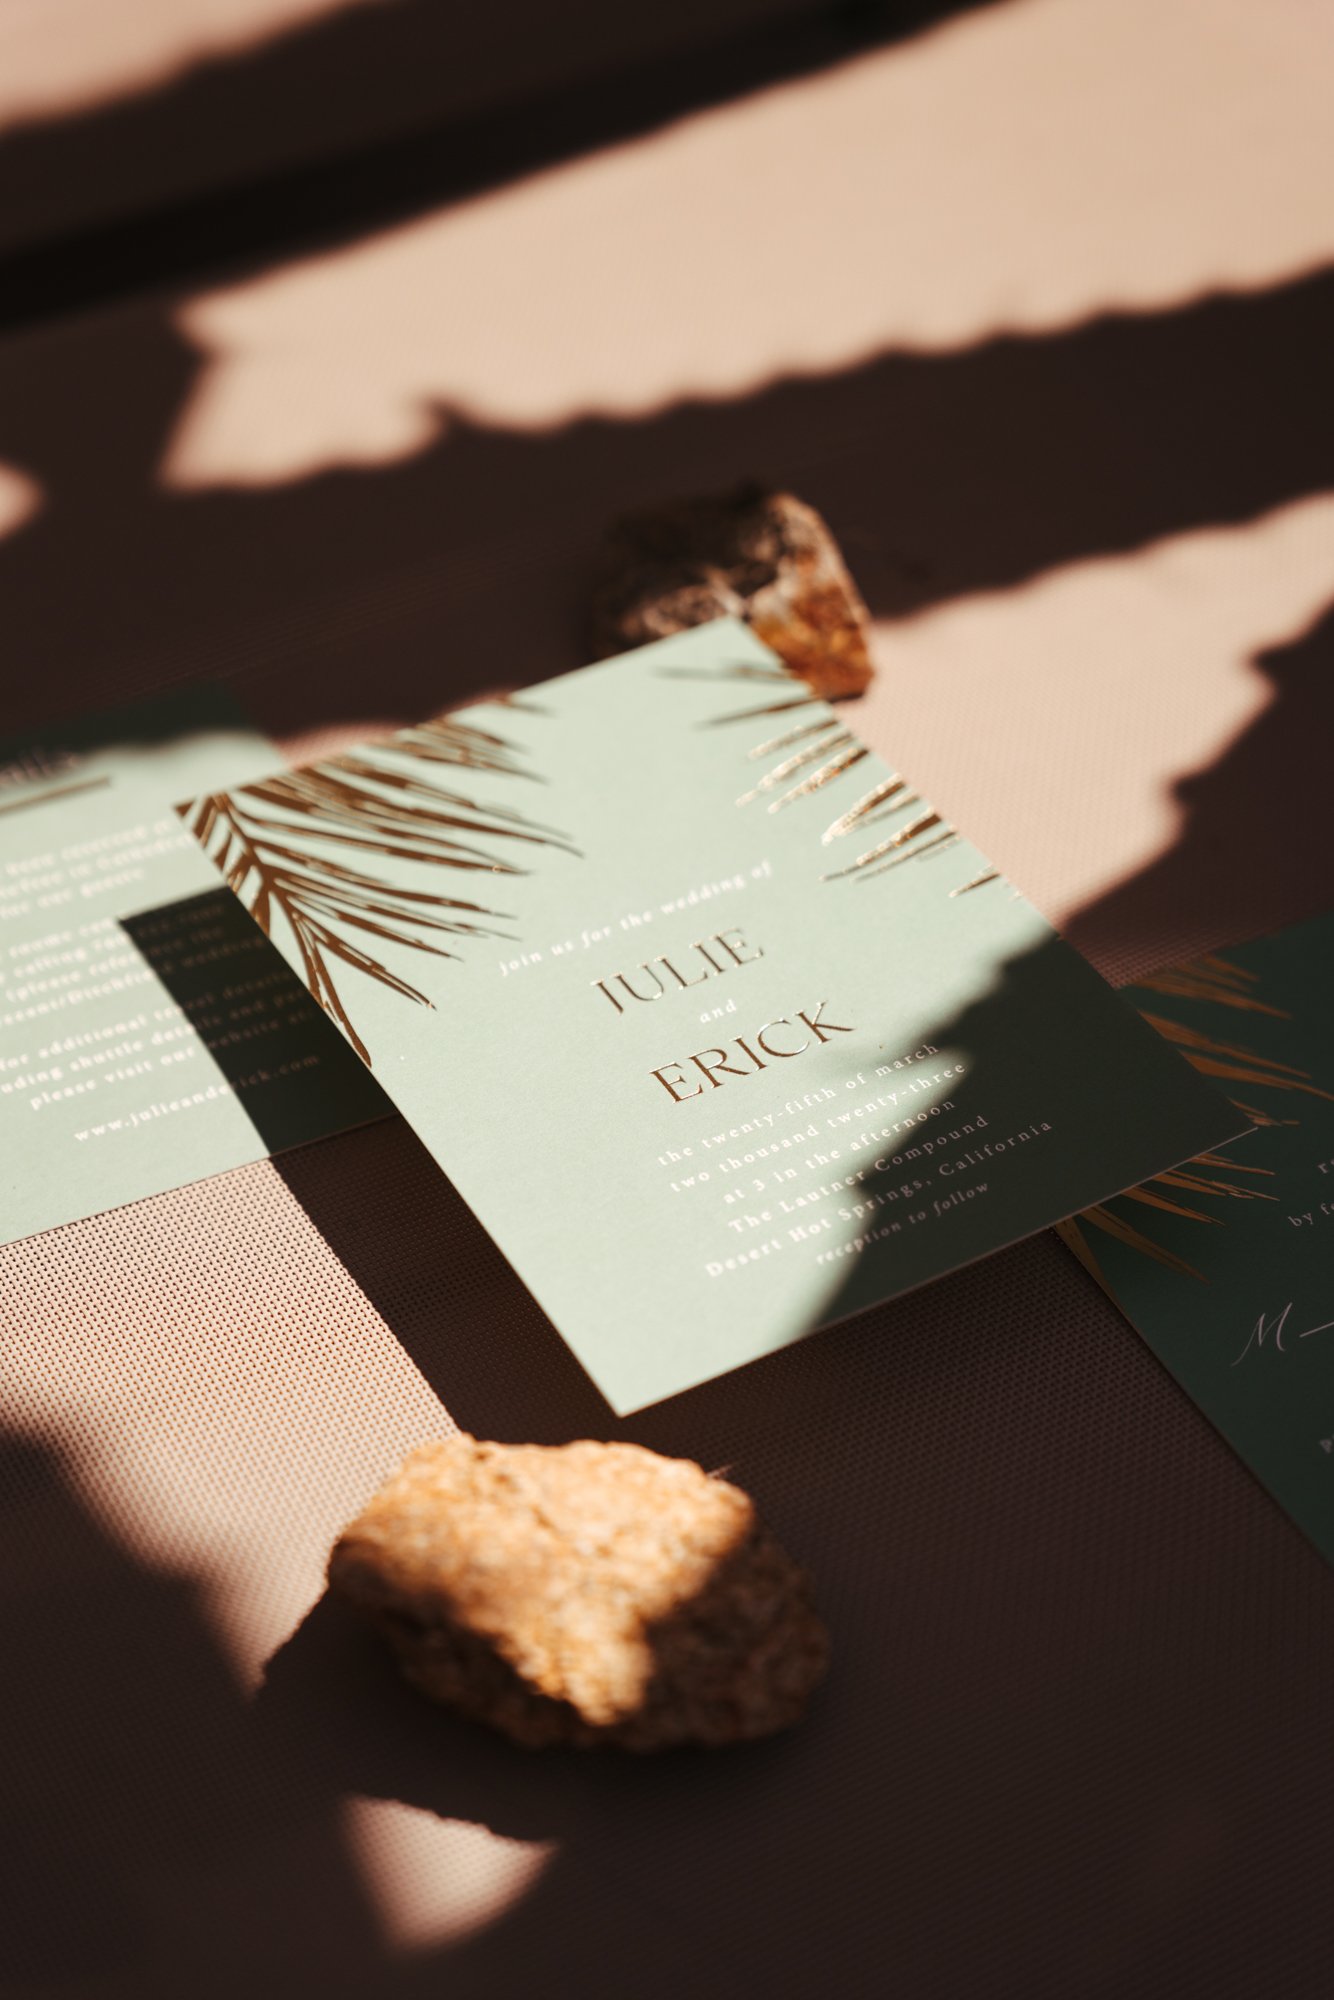  Desert inspired sage and gold wedding invite | The Lautner Compound Palm Springs Wedding | Tida Svy Photography | www.tidasvy.com 